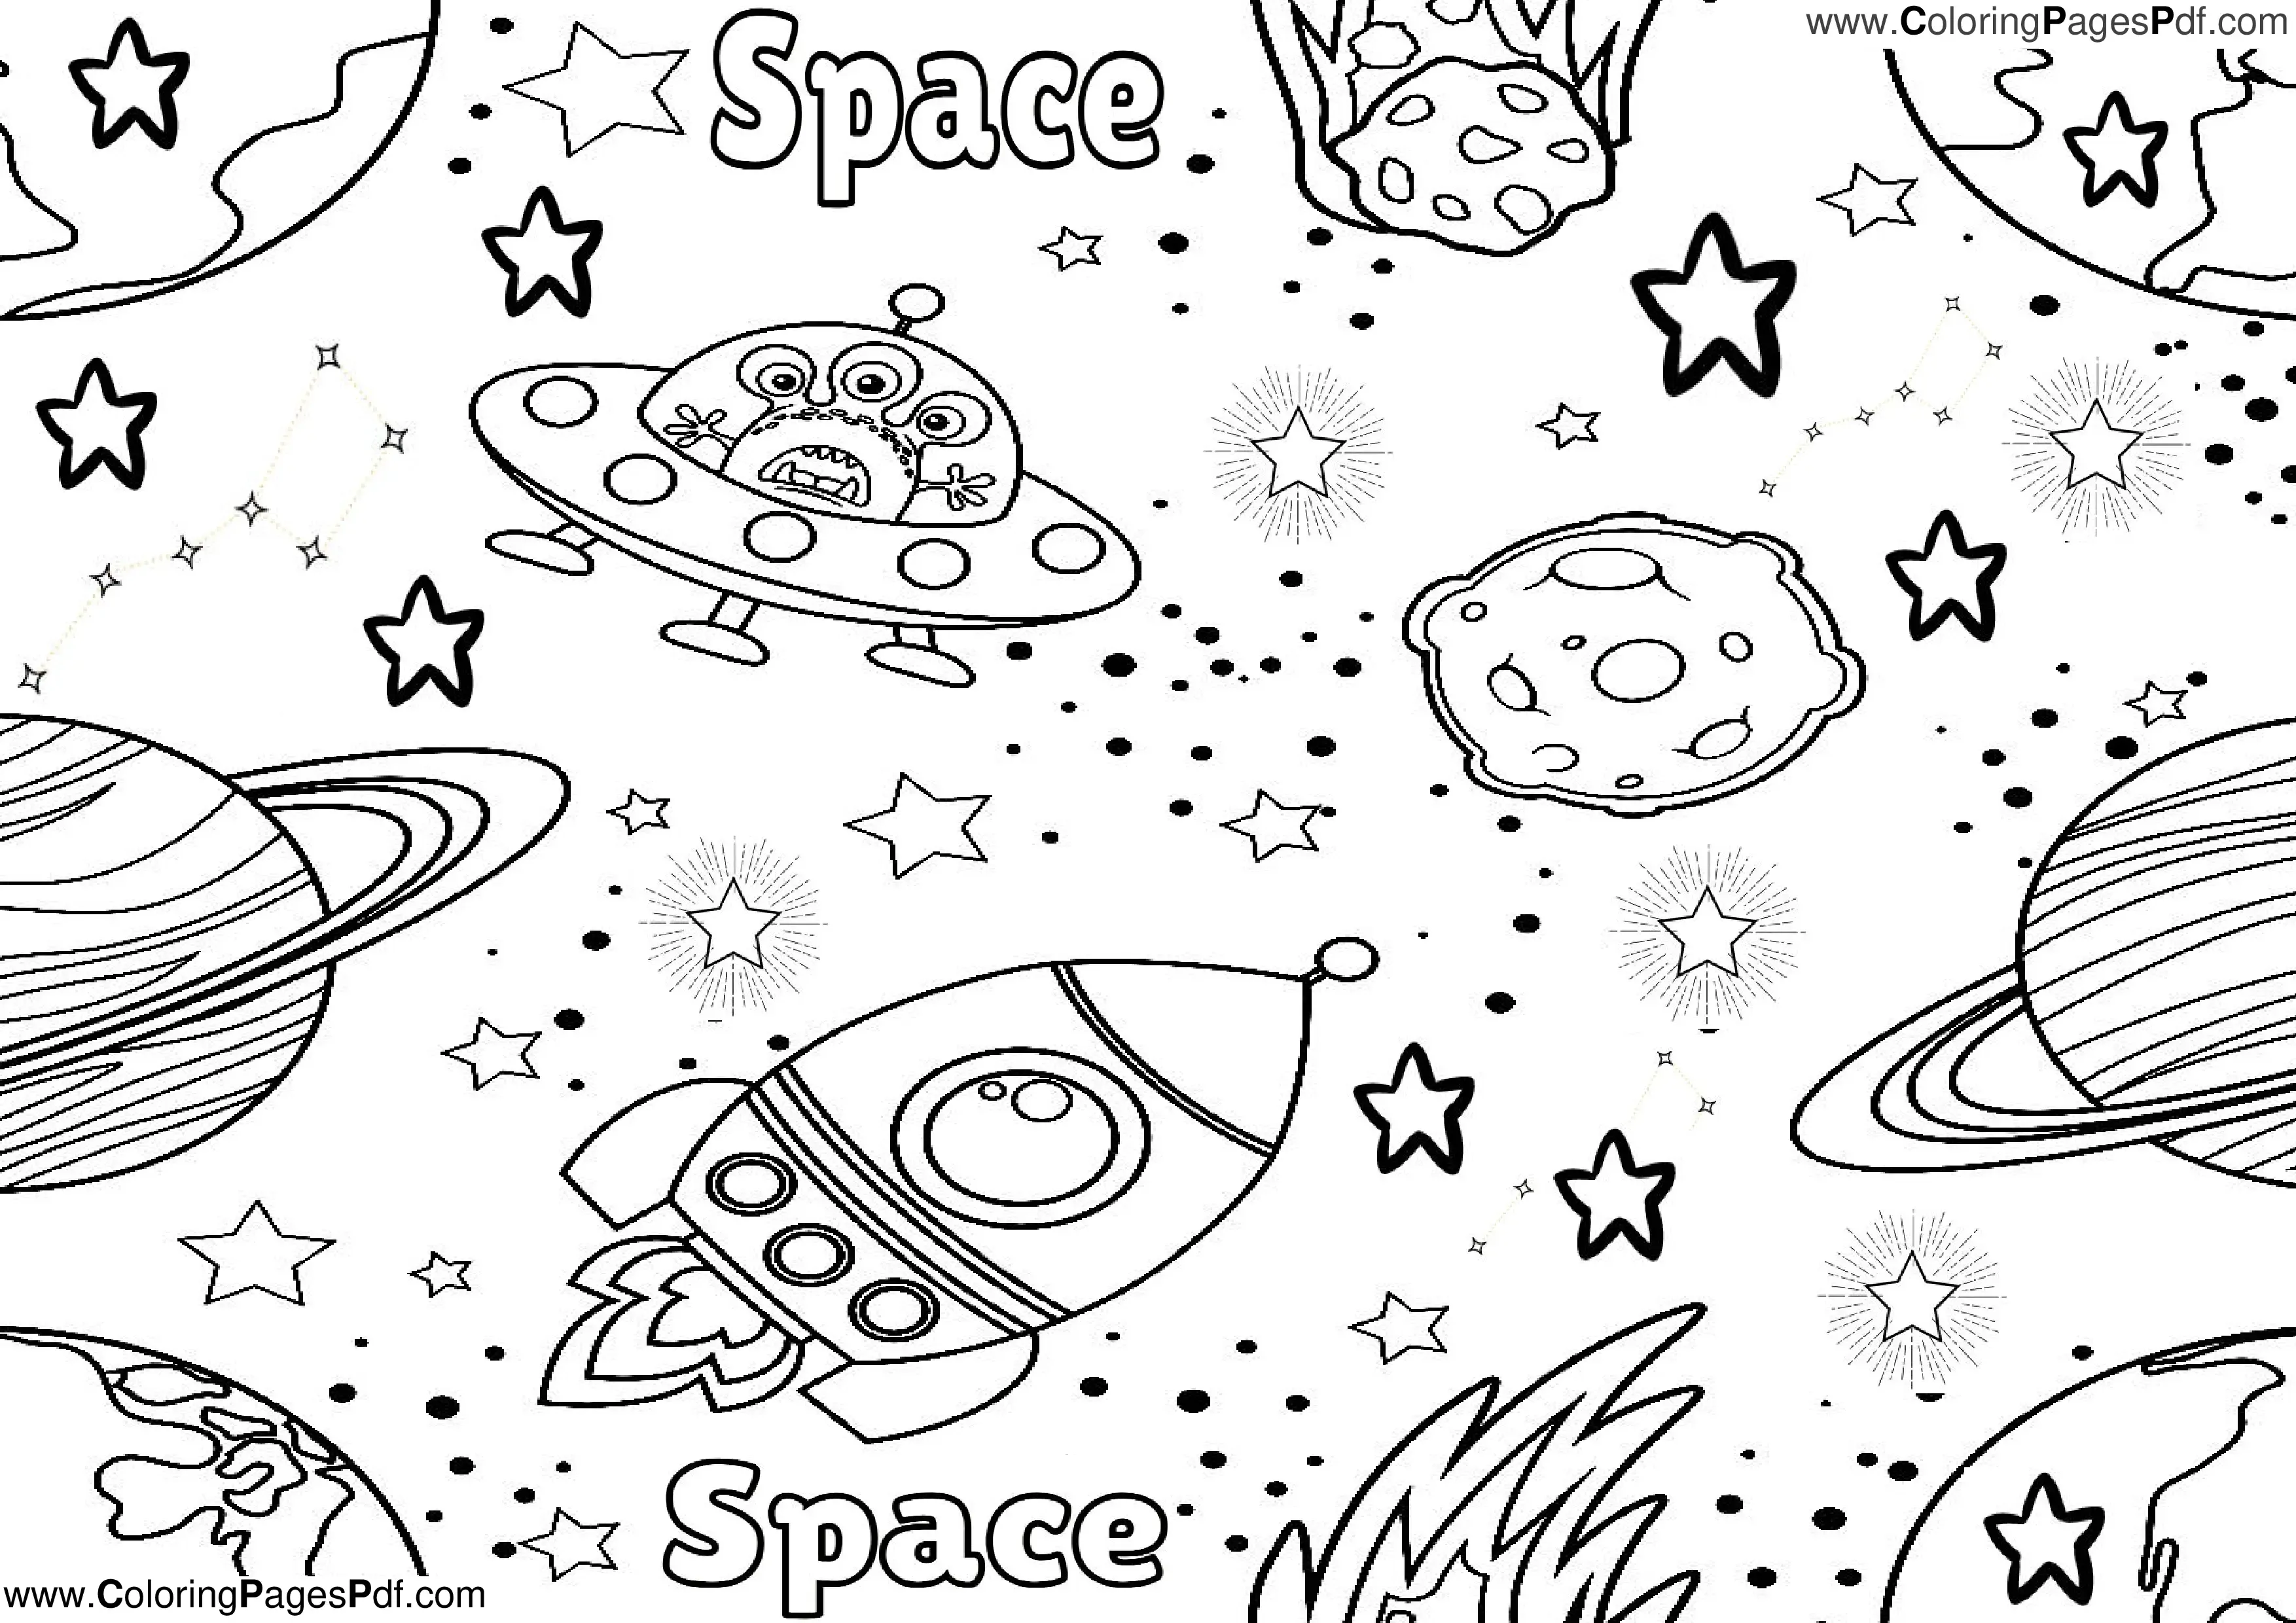 Free space coloring pages